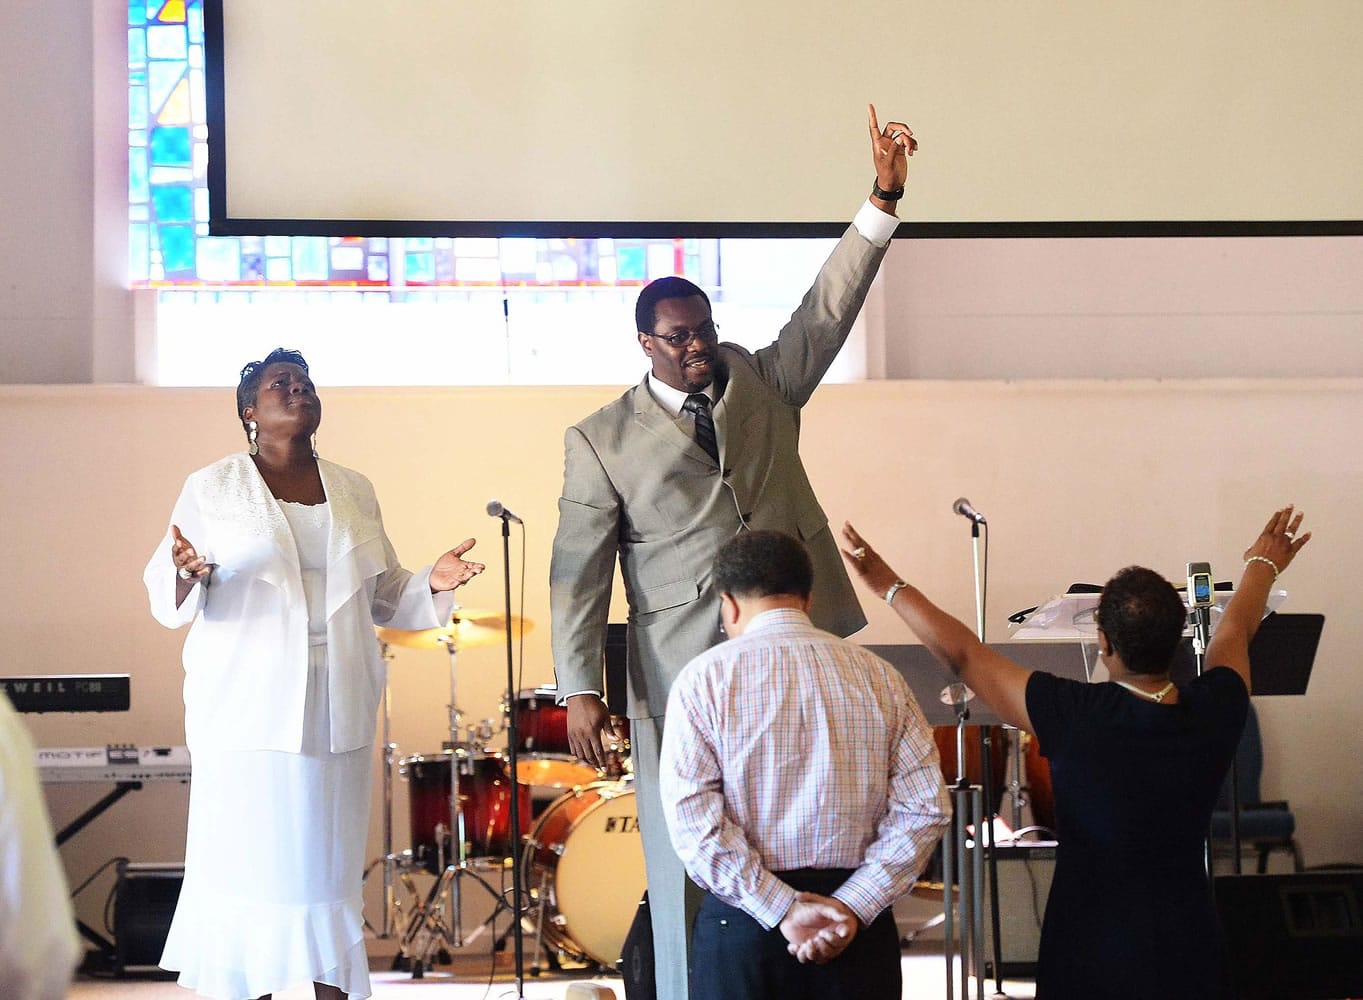 Co-pastor Rhonda Kinsey, left, and her husband, senior pastor Mannix Kinsey, lead the congregation during the 11 a.m. Sunday service at Briar Creek Road Baptist Church on June 28 in Charlotte, N.C.